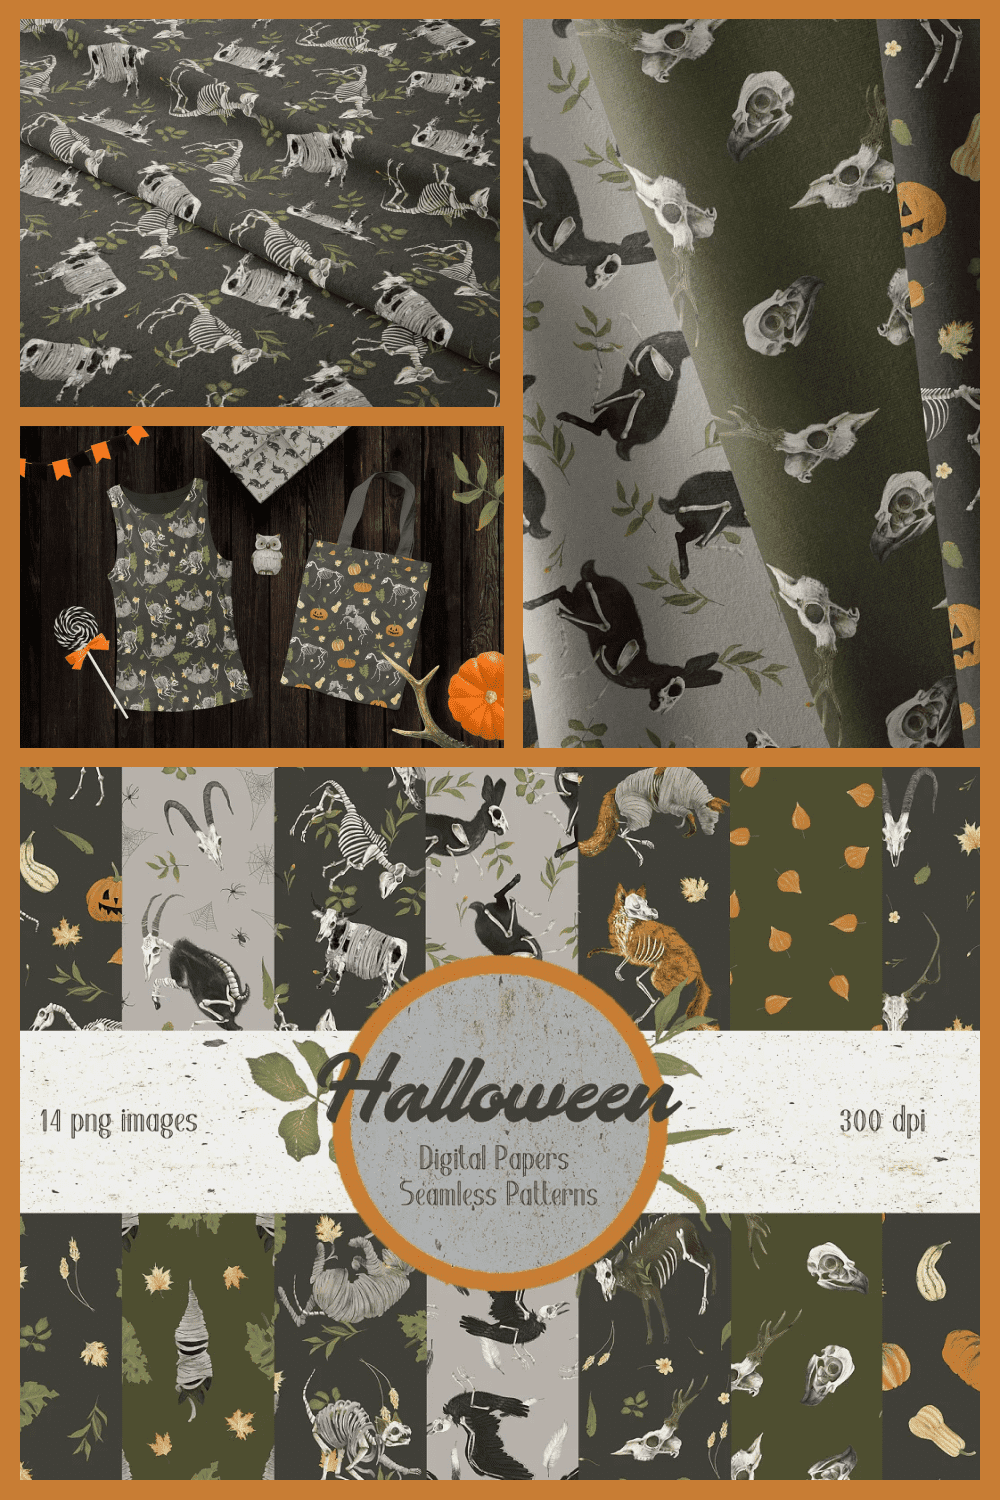 A high-quality and varied print that perfectly describes the Halloween holiday.